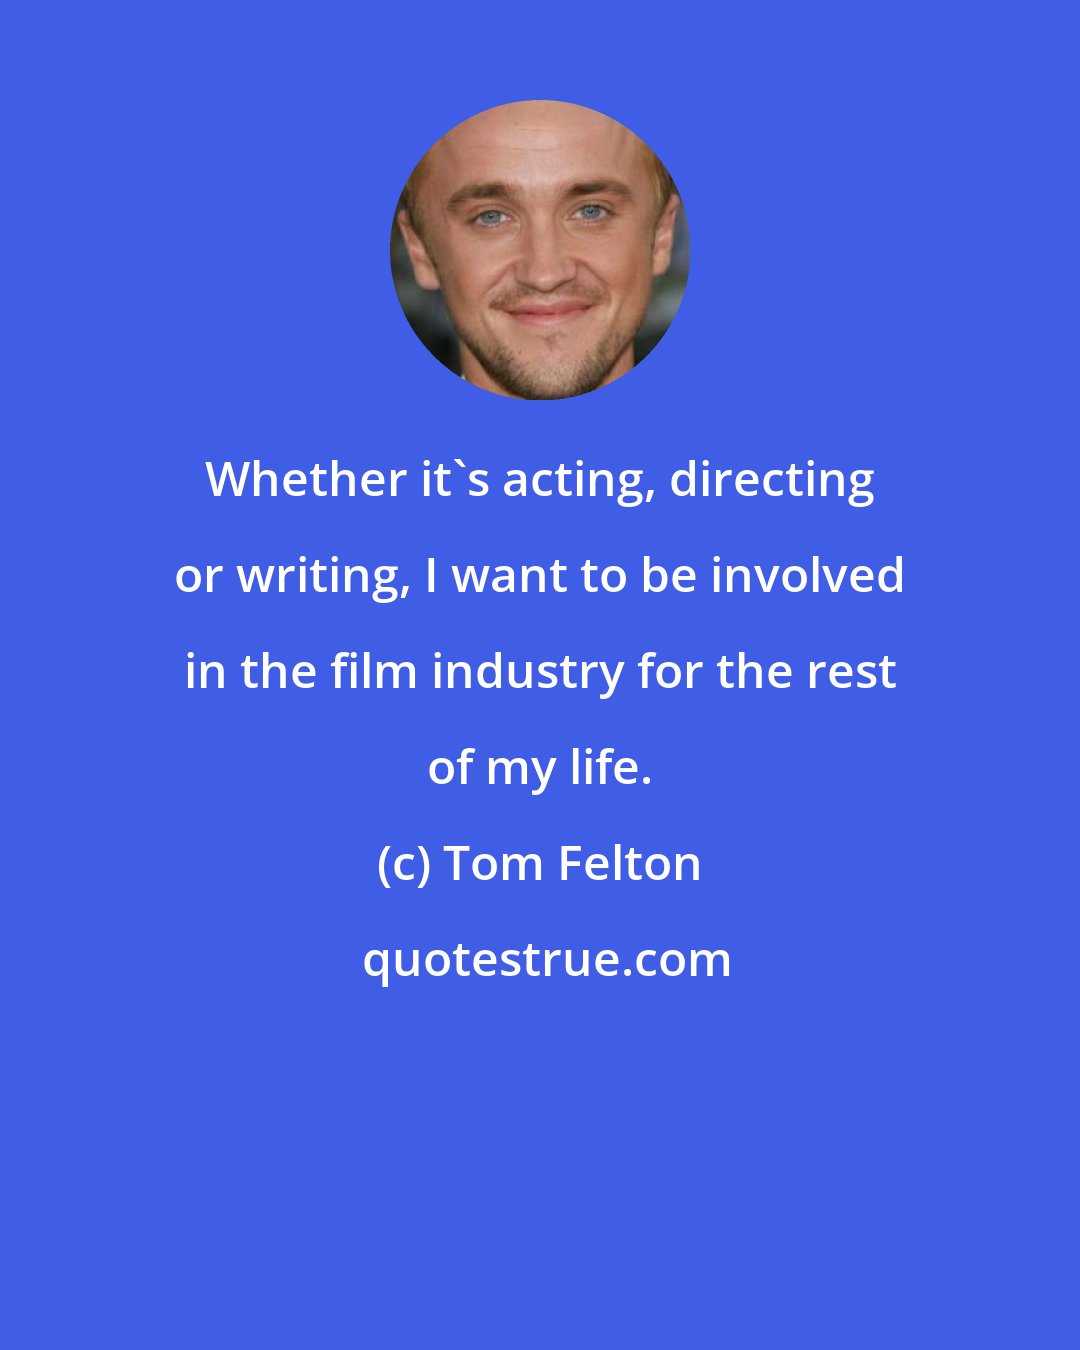 Tom Felton: Whether it's acting, directing or writing, I want to be involved in the film industry for the rest of my life.